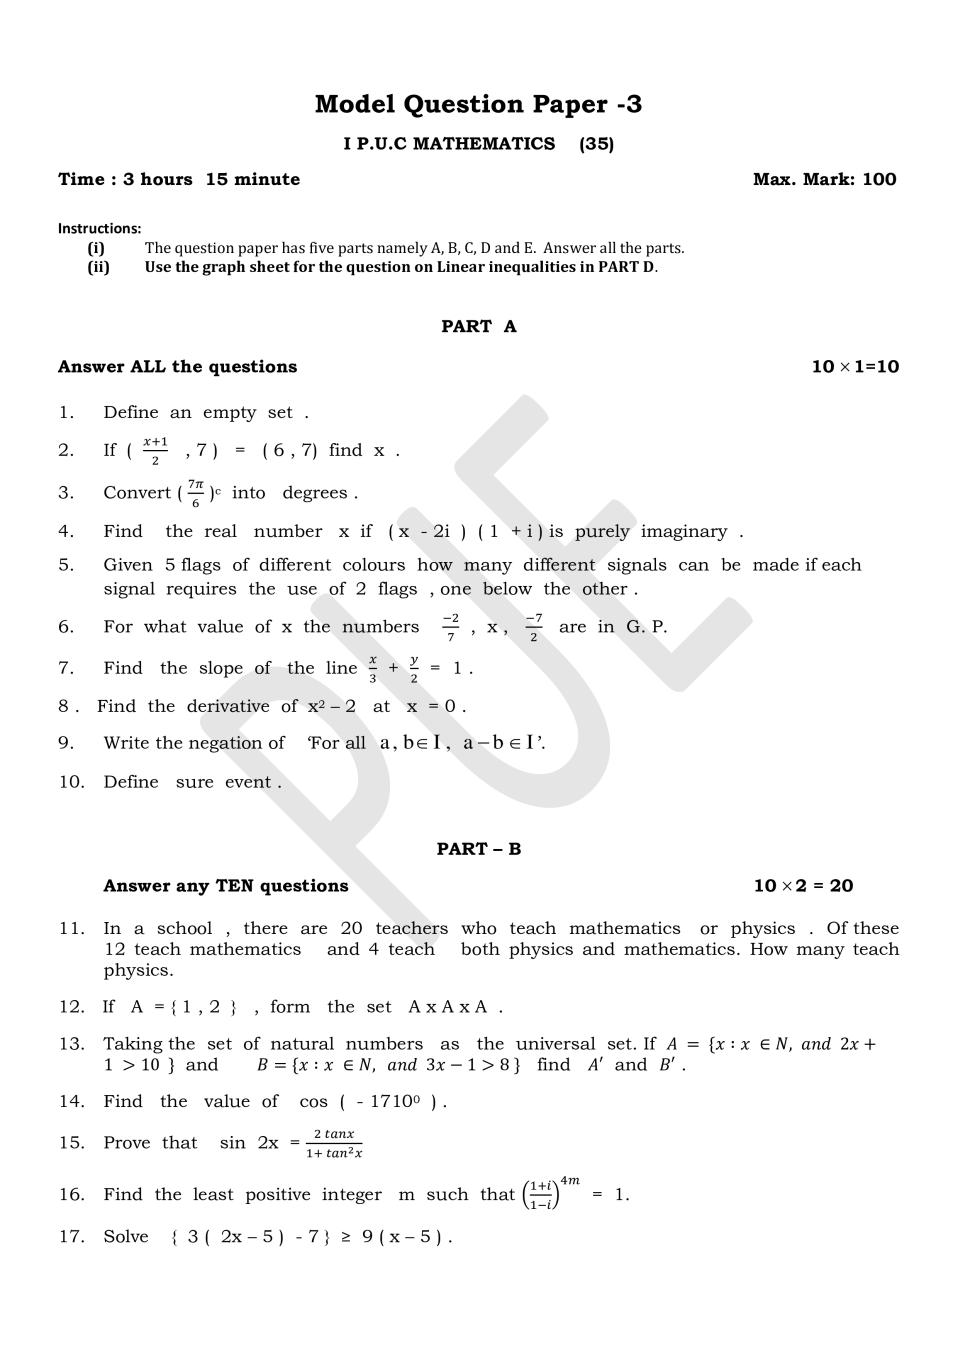 Karnataka 1st PUC Model Question Paper for Maths Set 3 - Page 1